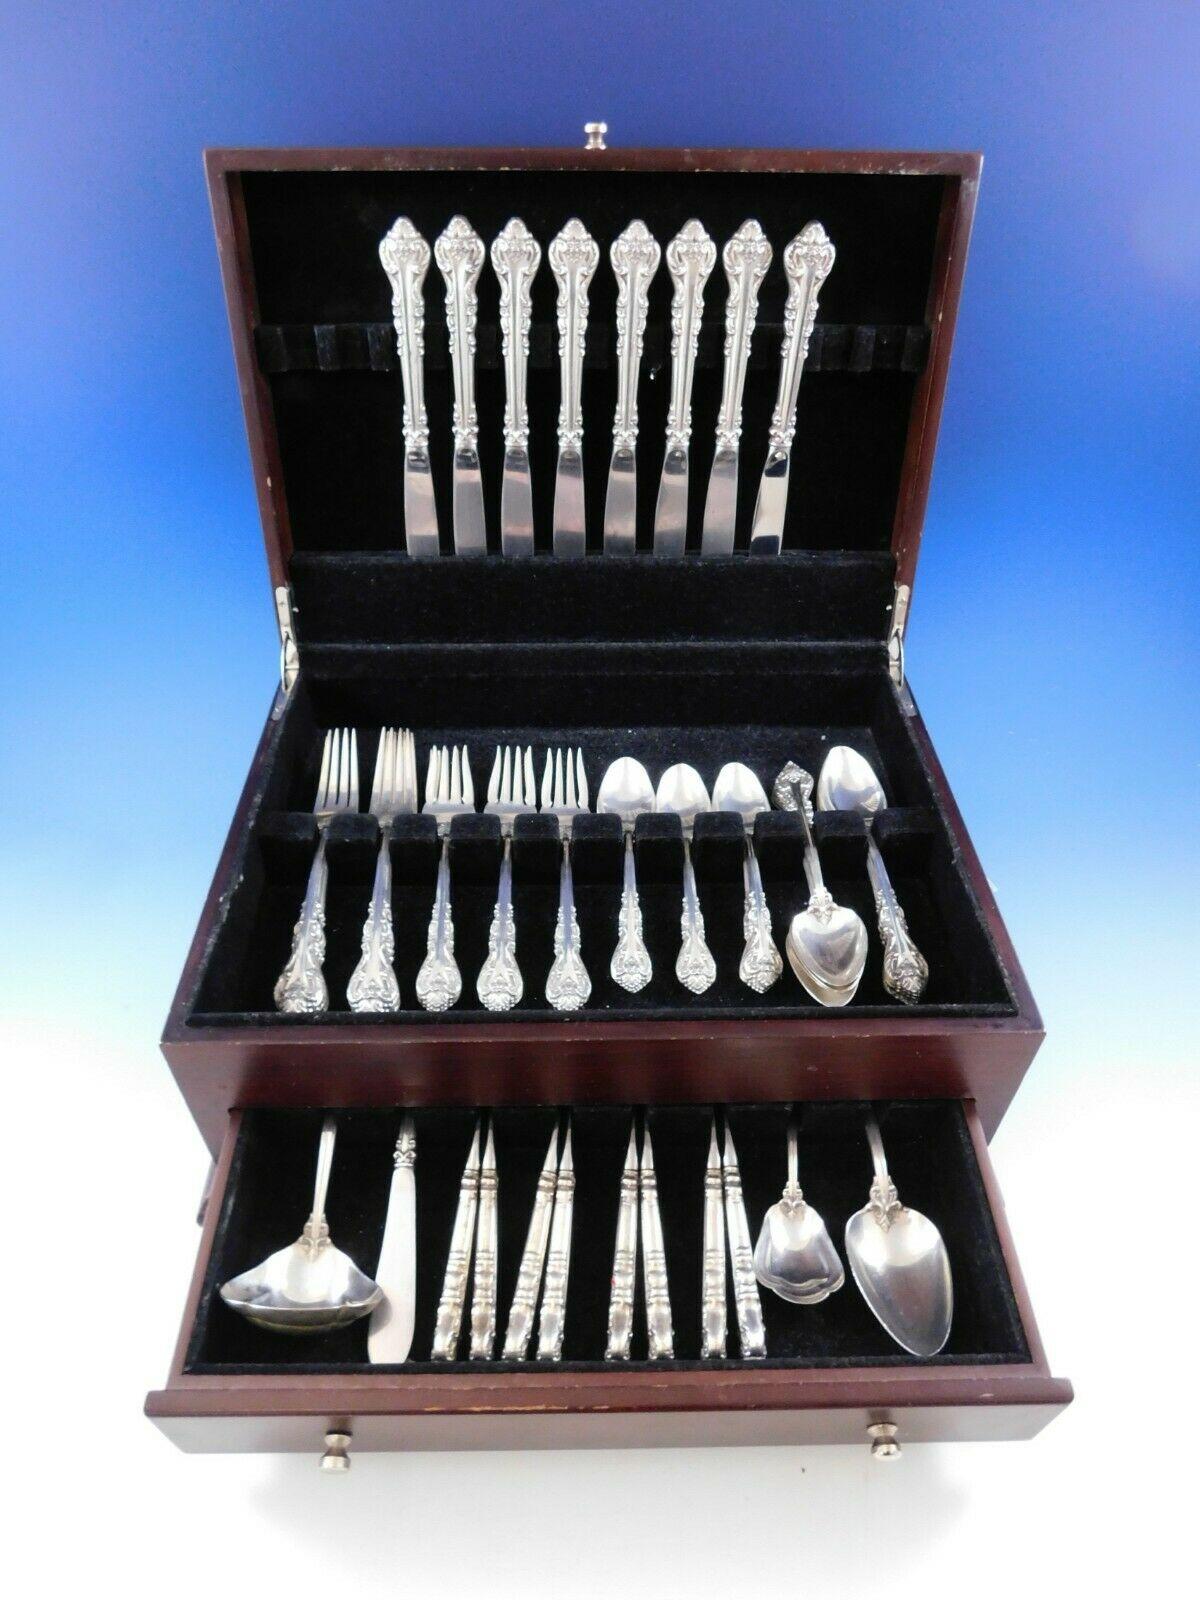 Masterpiece by International (handles not pierced) sterling silver flatware set - 52 pieces. This set includes:

8 knives, 9 1/4